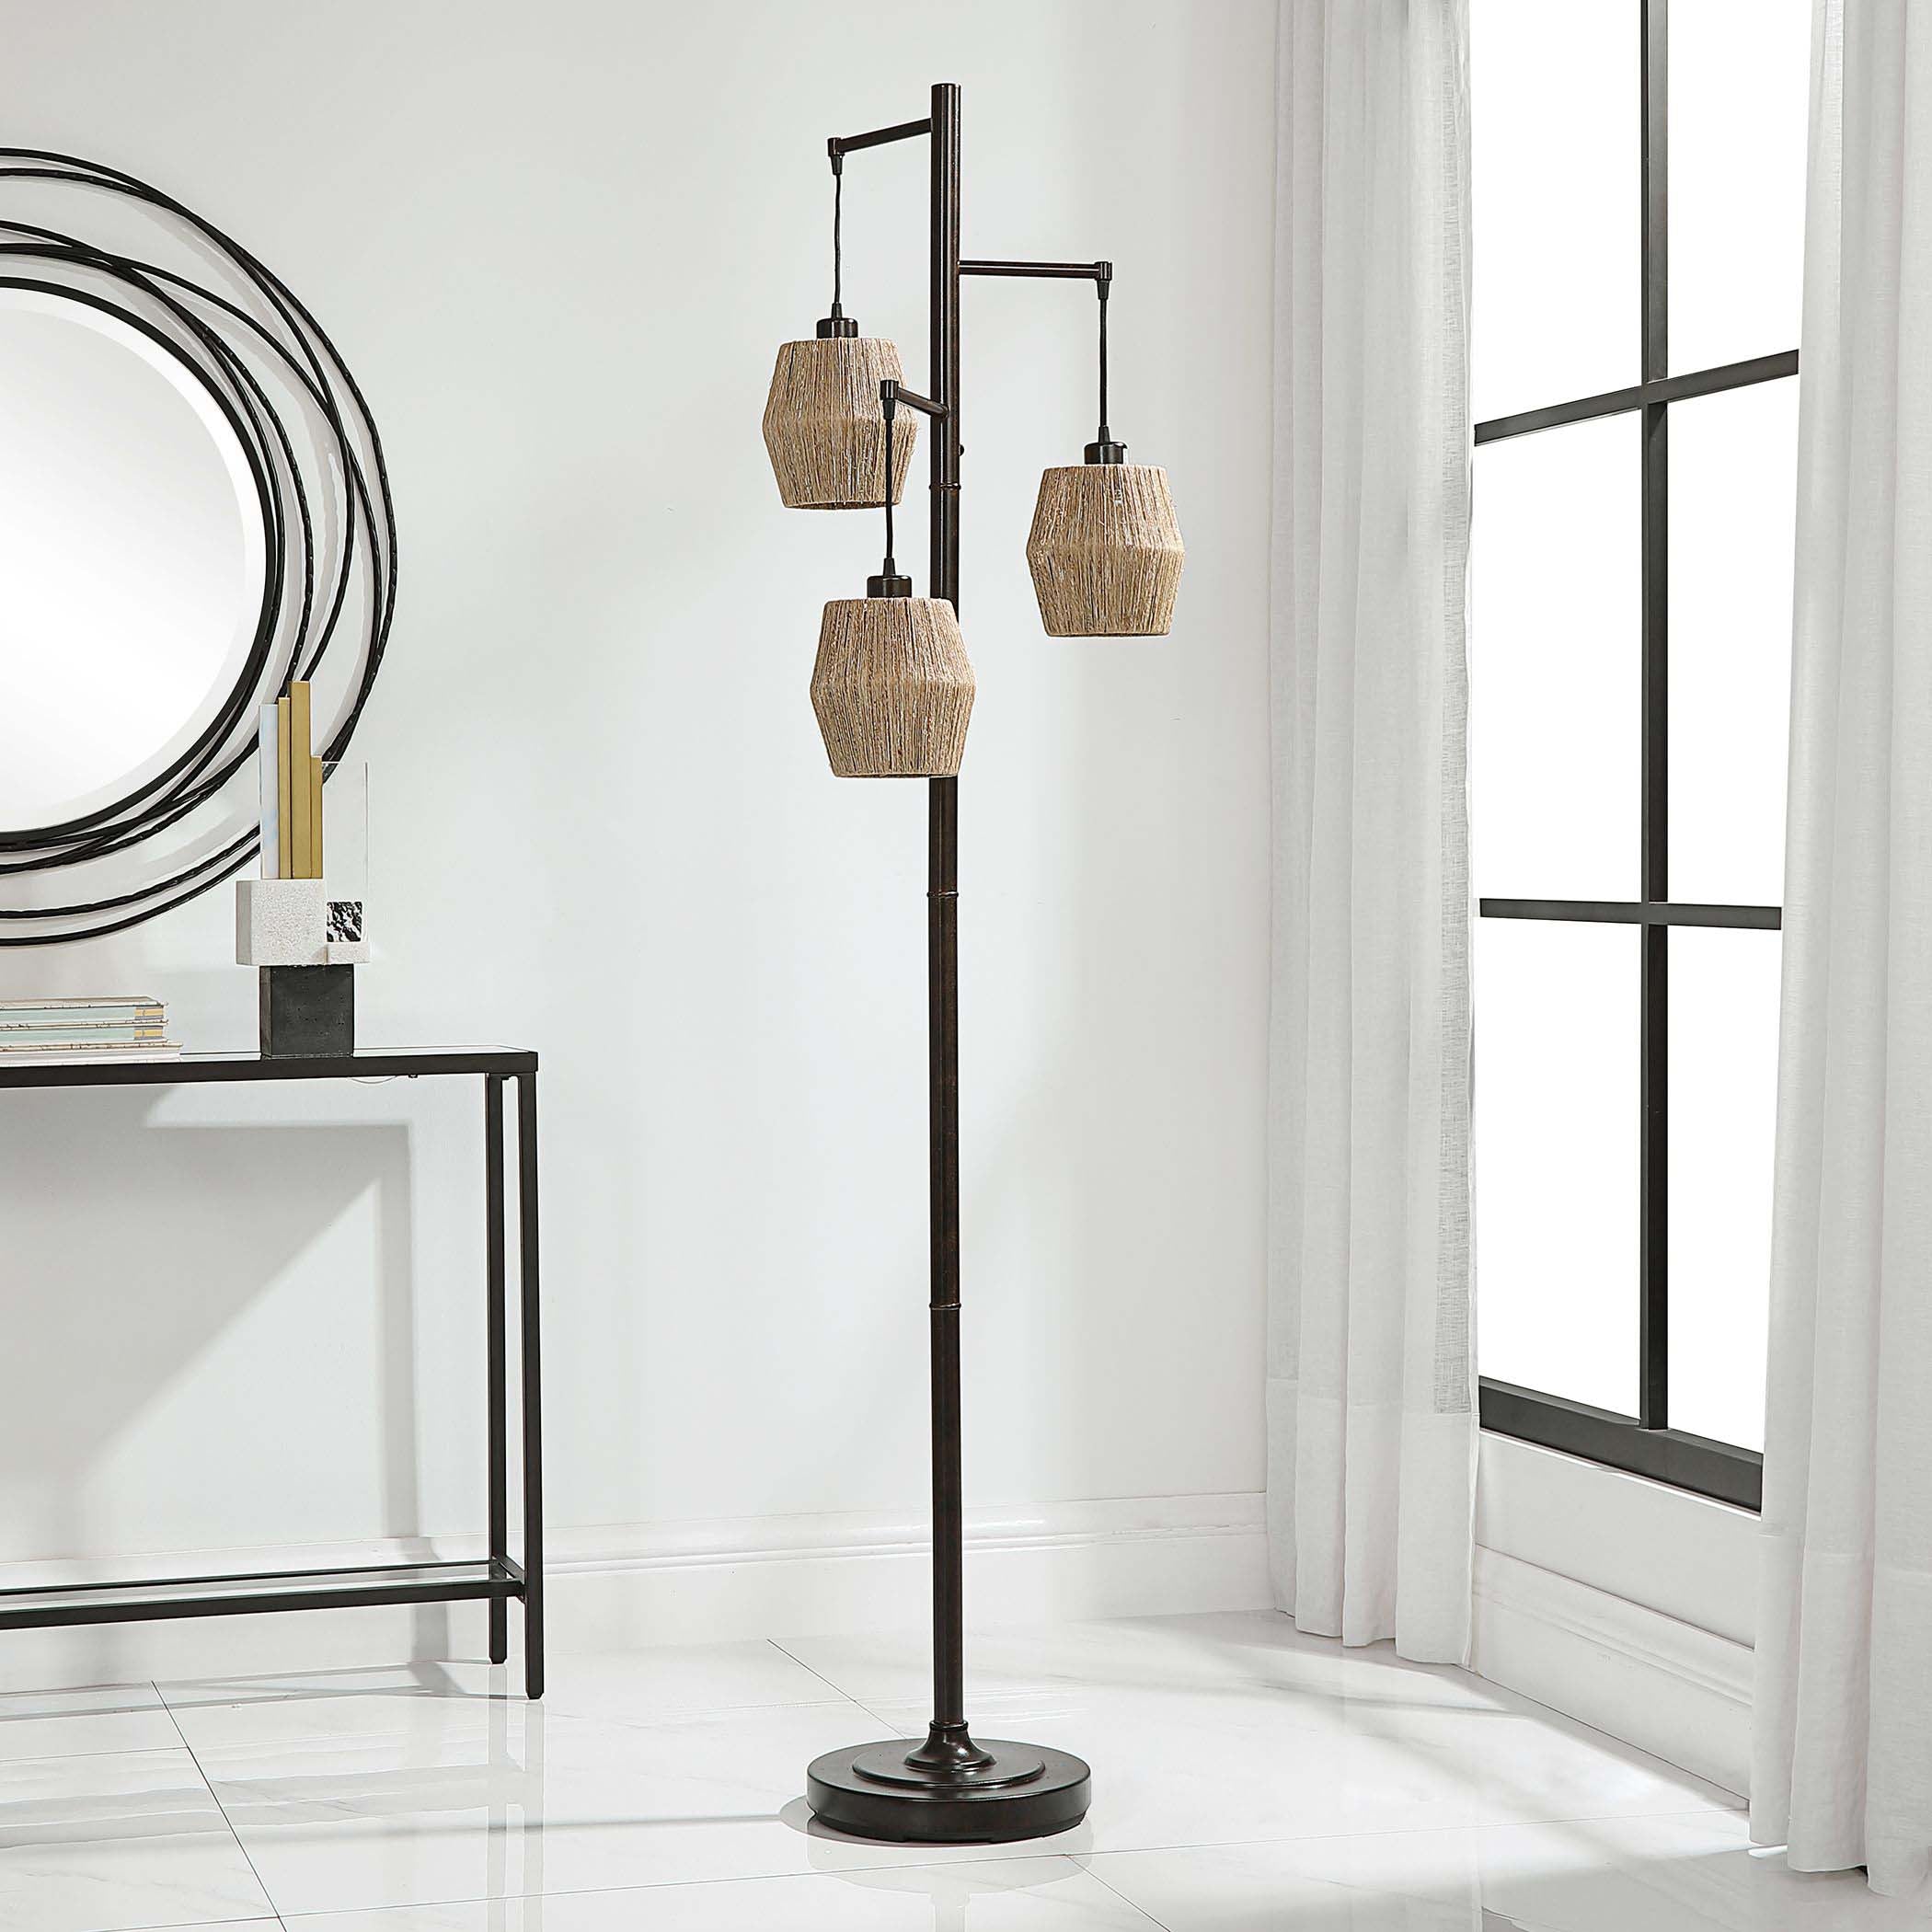 Decor Market Oil Rubbed Bronze Finish With Gold Highlights Floor Lamp - Three Drum Shaped Shades